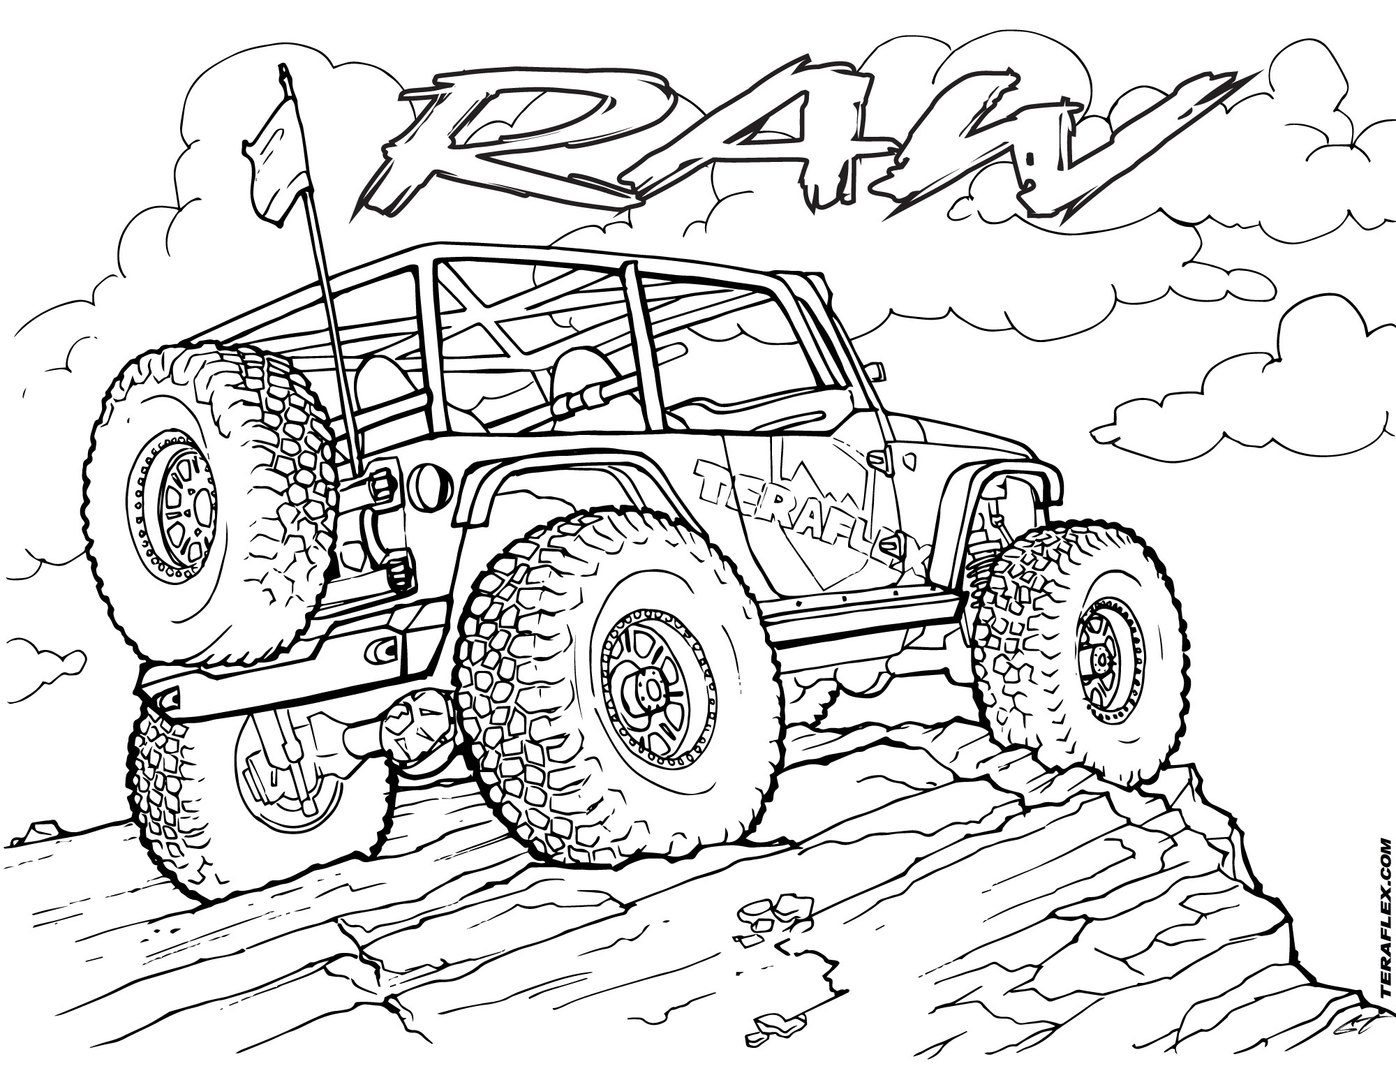 Cherokee Coloring Pages at GetColorings.com | Free printable colorings